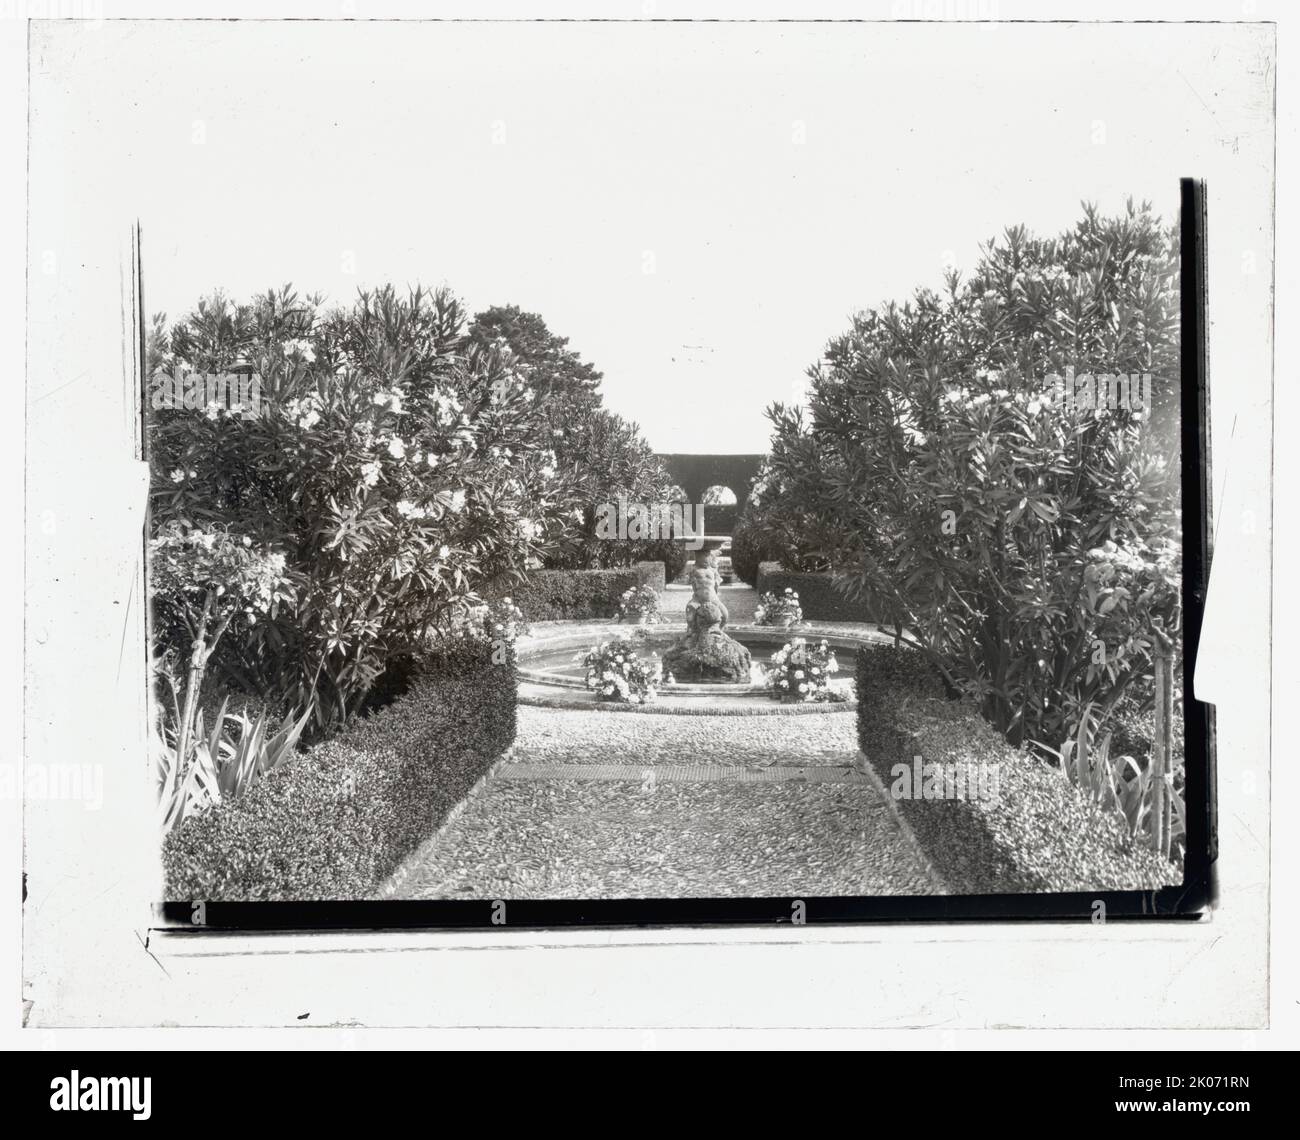 Villa Gamberaia, Settignano, Tuscany, Italy, 1925. House Architecture: Zanobi Lapi, 1610- 1630. Landscape: Zanobi Lapi and others, from 1610. Also, water terrace created on south parterre by Princess Jeanne Ghyka and Martino Porcinai from 1896. Other: Baroness Clemens August von Ketteler owned the villa in 1925. Stock Photo